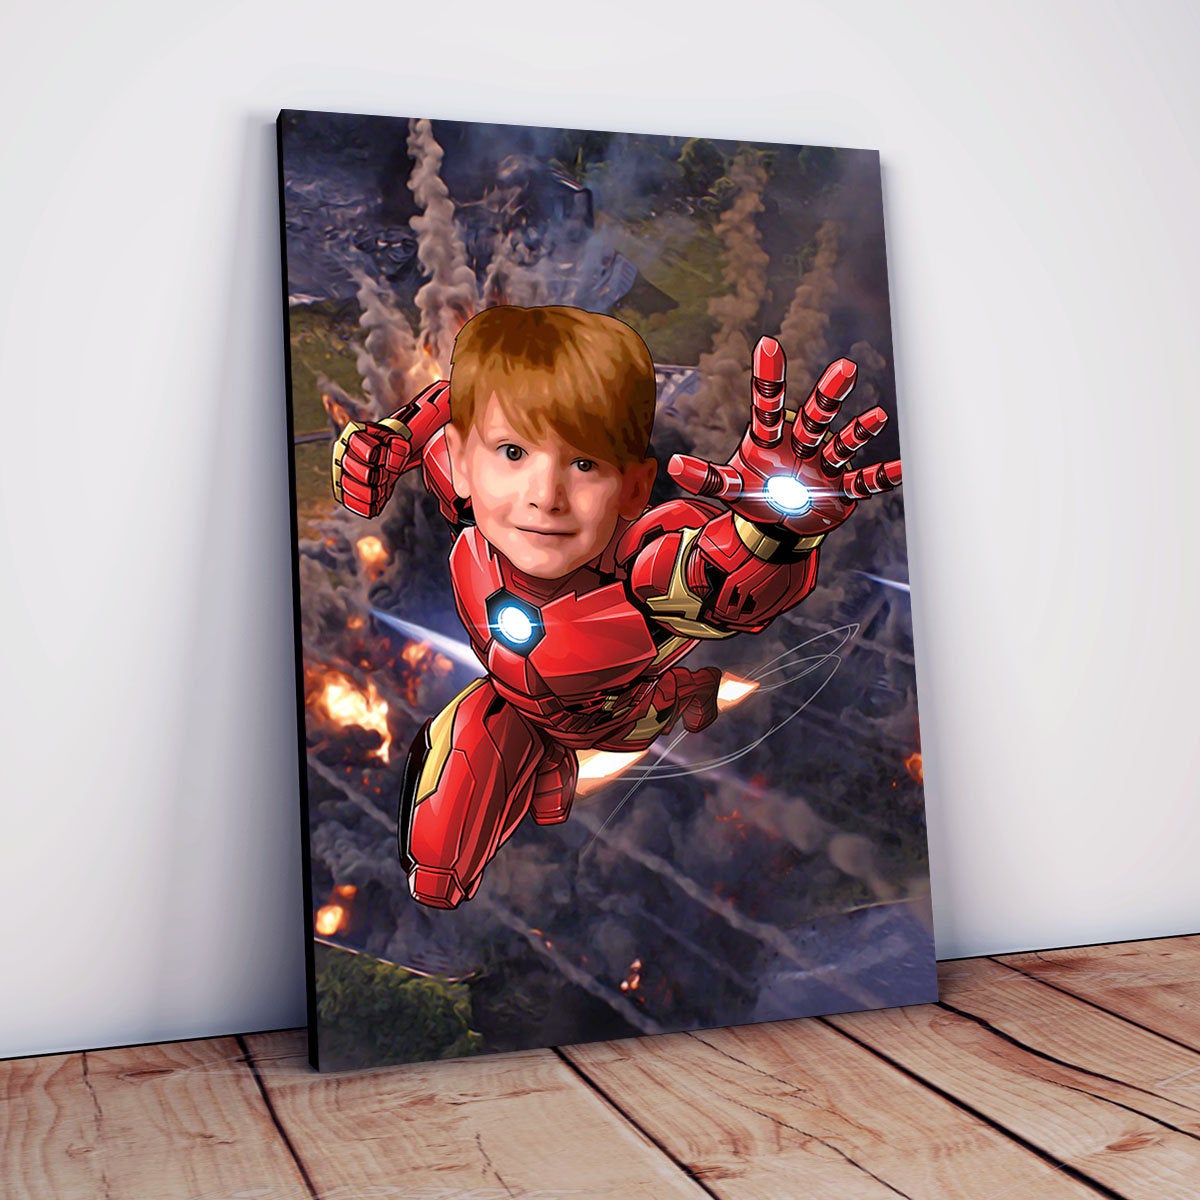 Your child will feel like a real superhero with this personalized Spiderman costume.